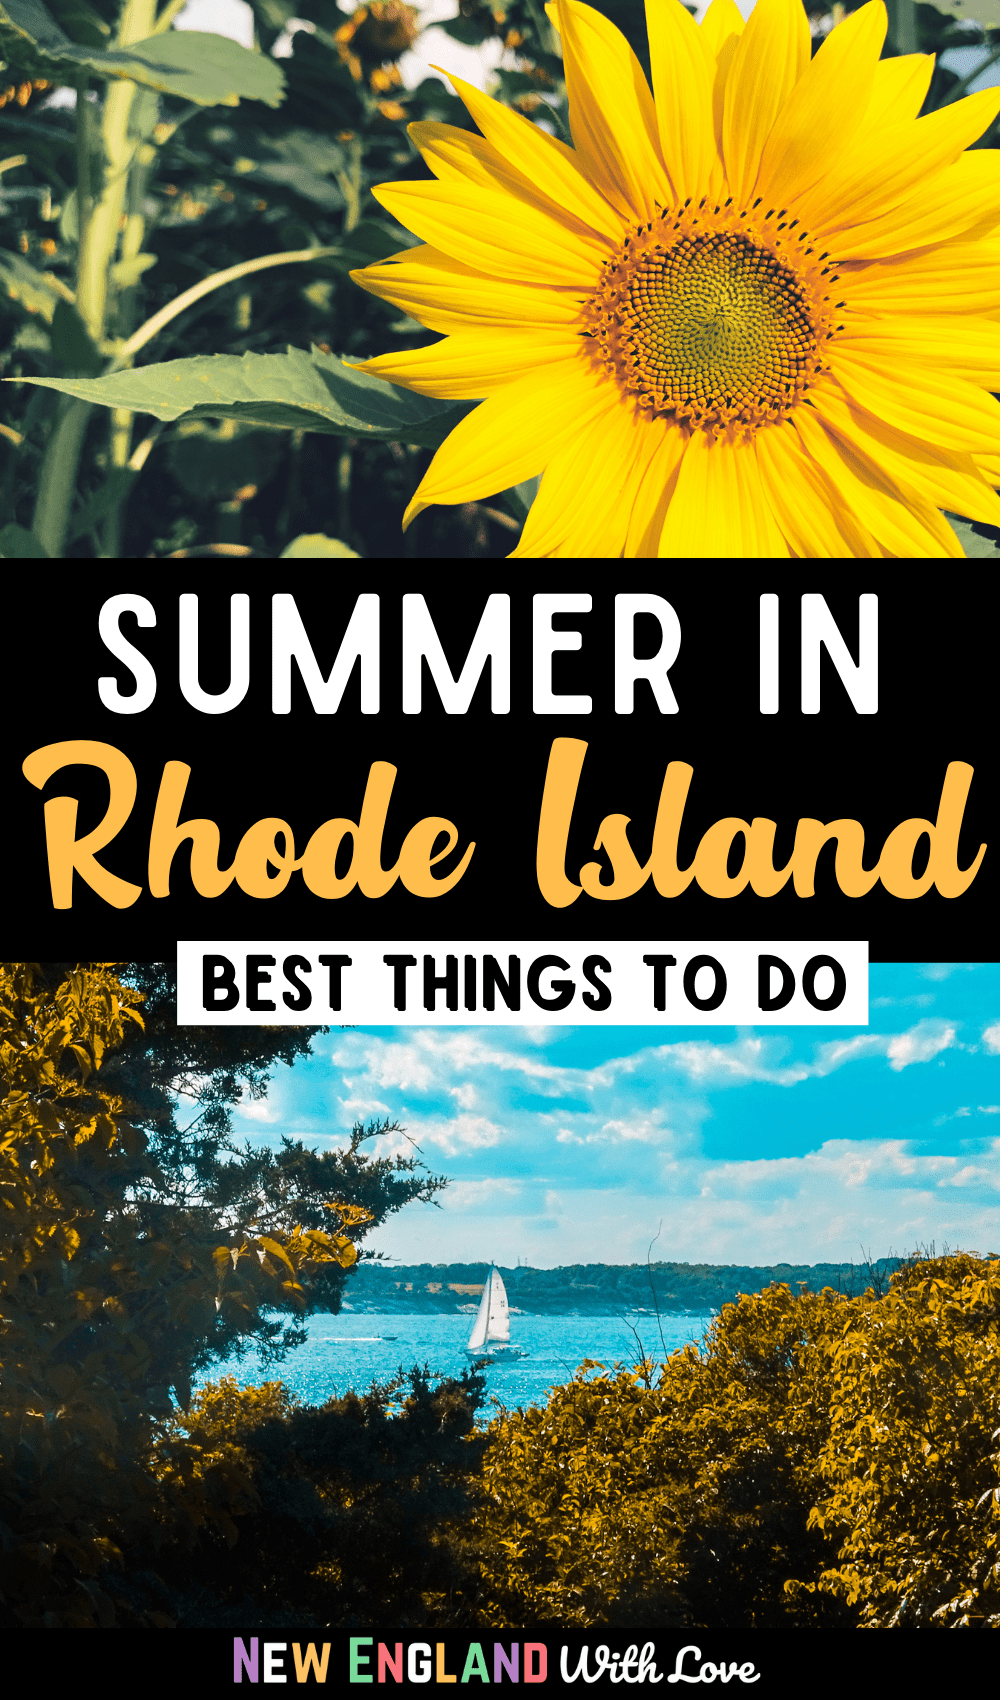 Pinterest graphic reading "Summer in Rhode Island Best Things To Do"